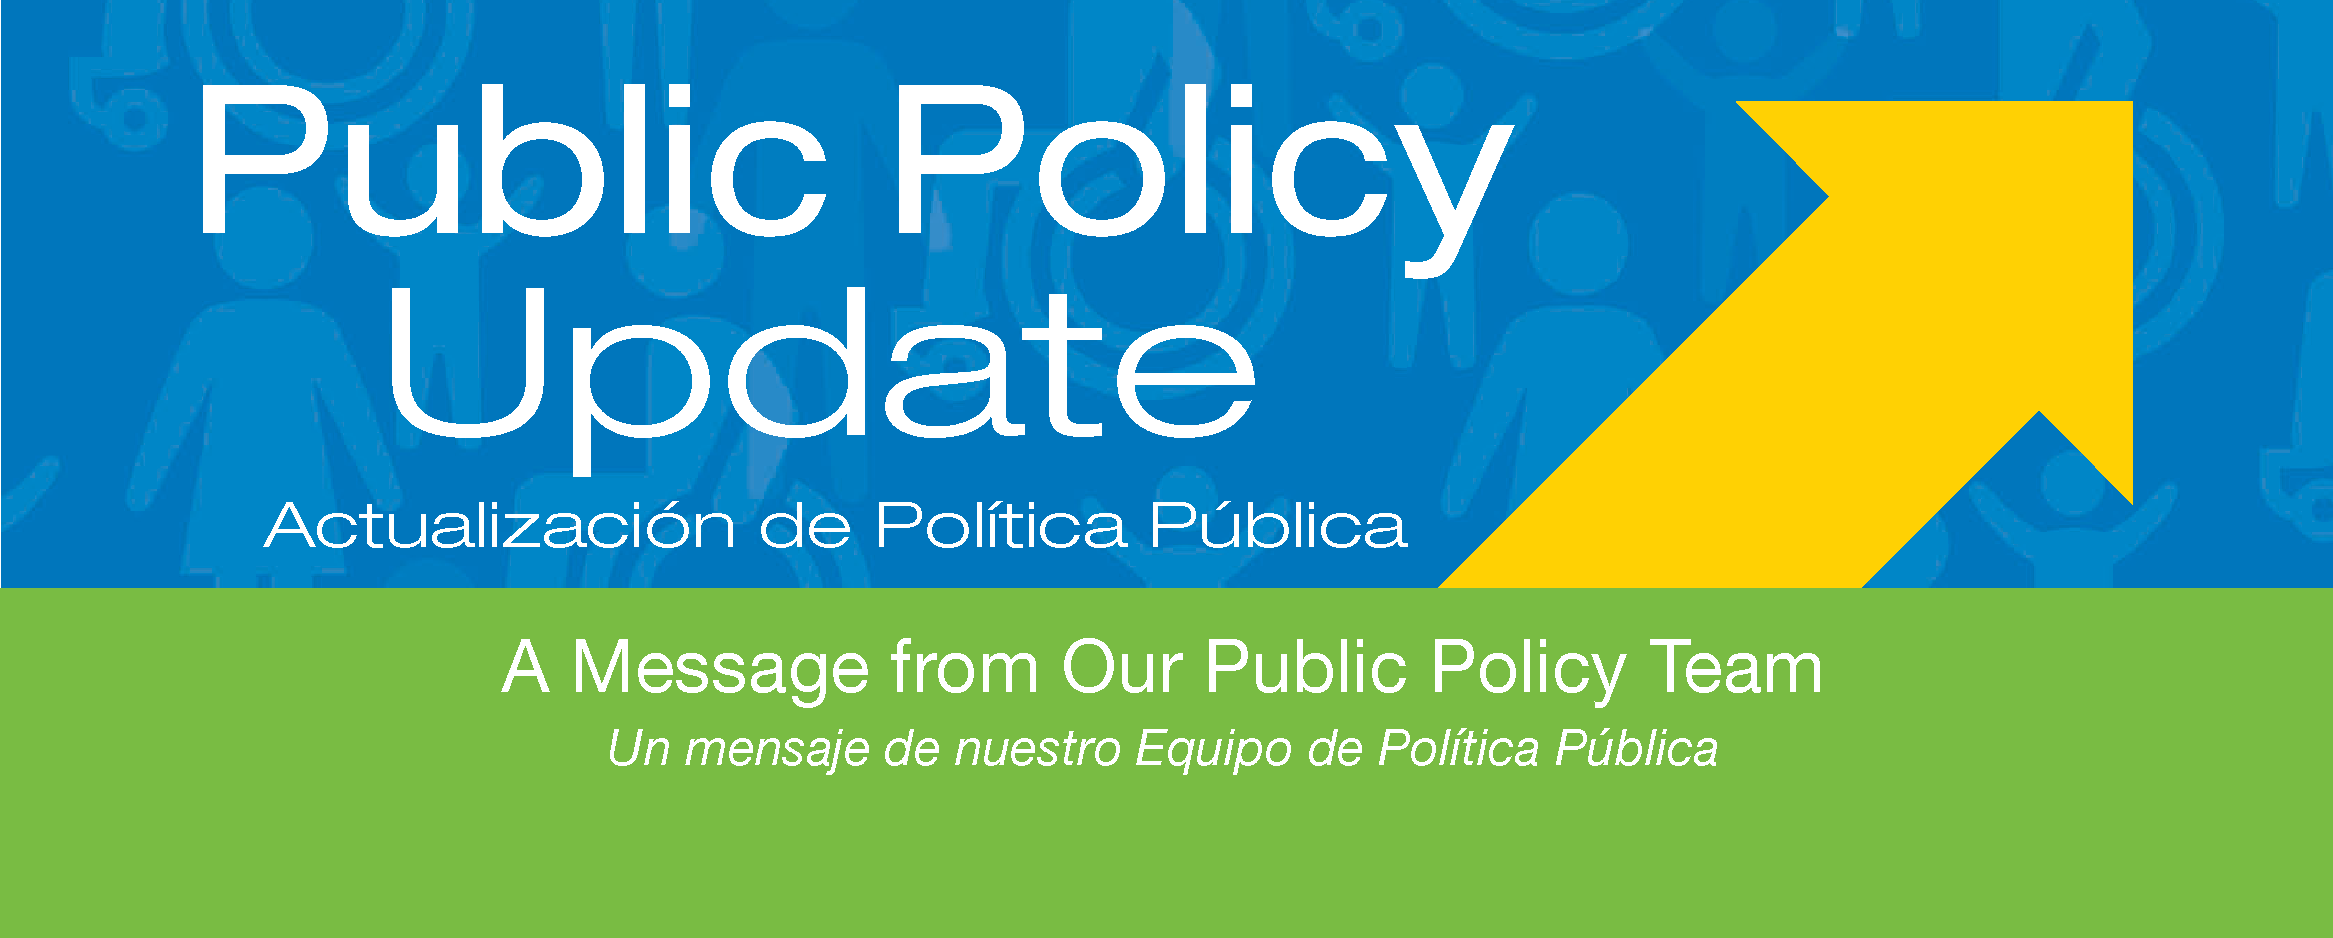 Public Policy Update - A Message from Our Public Policy Team